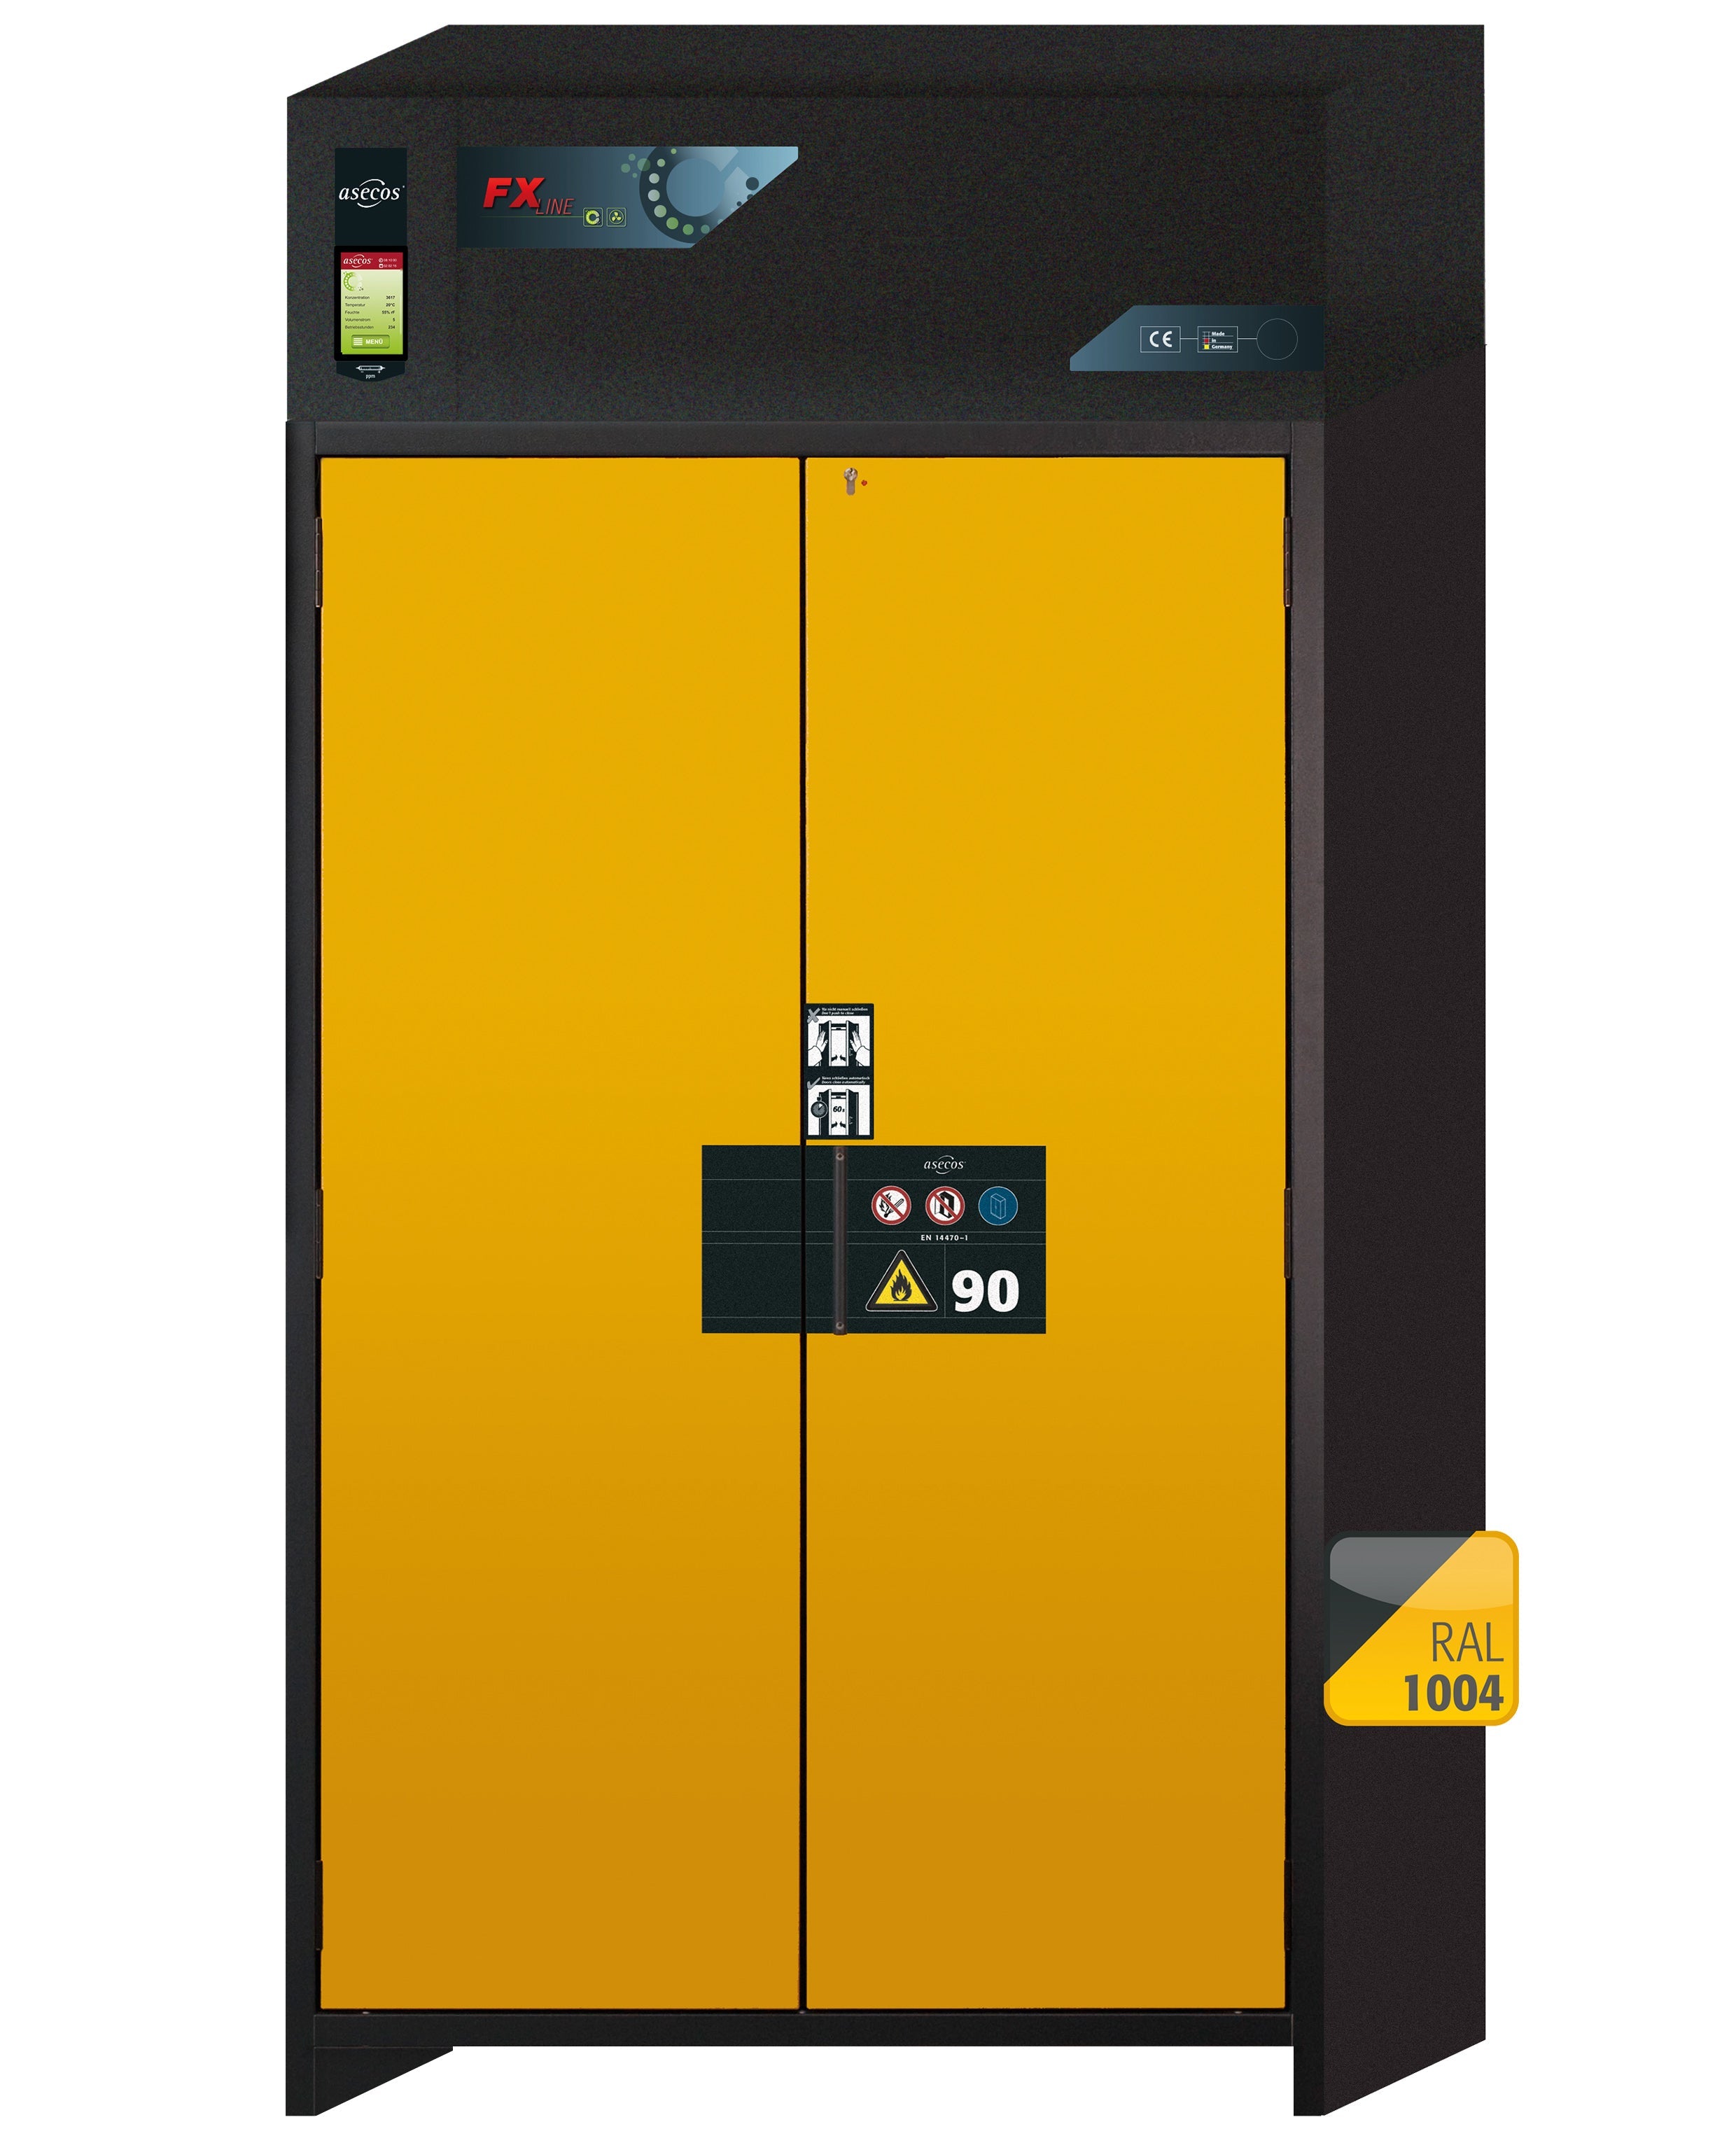 Type 90 recirculating air filter cabinet FX-PEGASUS-90 model FX90.229.120.WDAC in safety yellow RAL 1004 with 3x standard pull-out tray (stainless steel 1.4301)